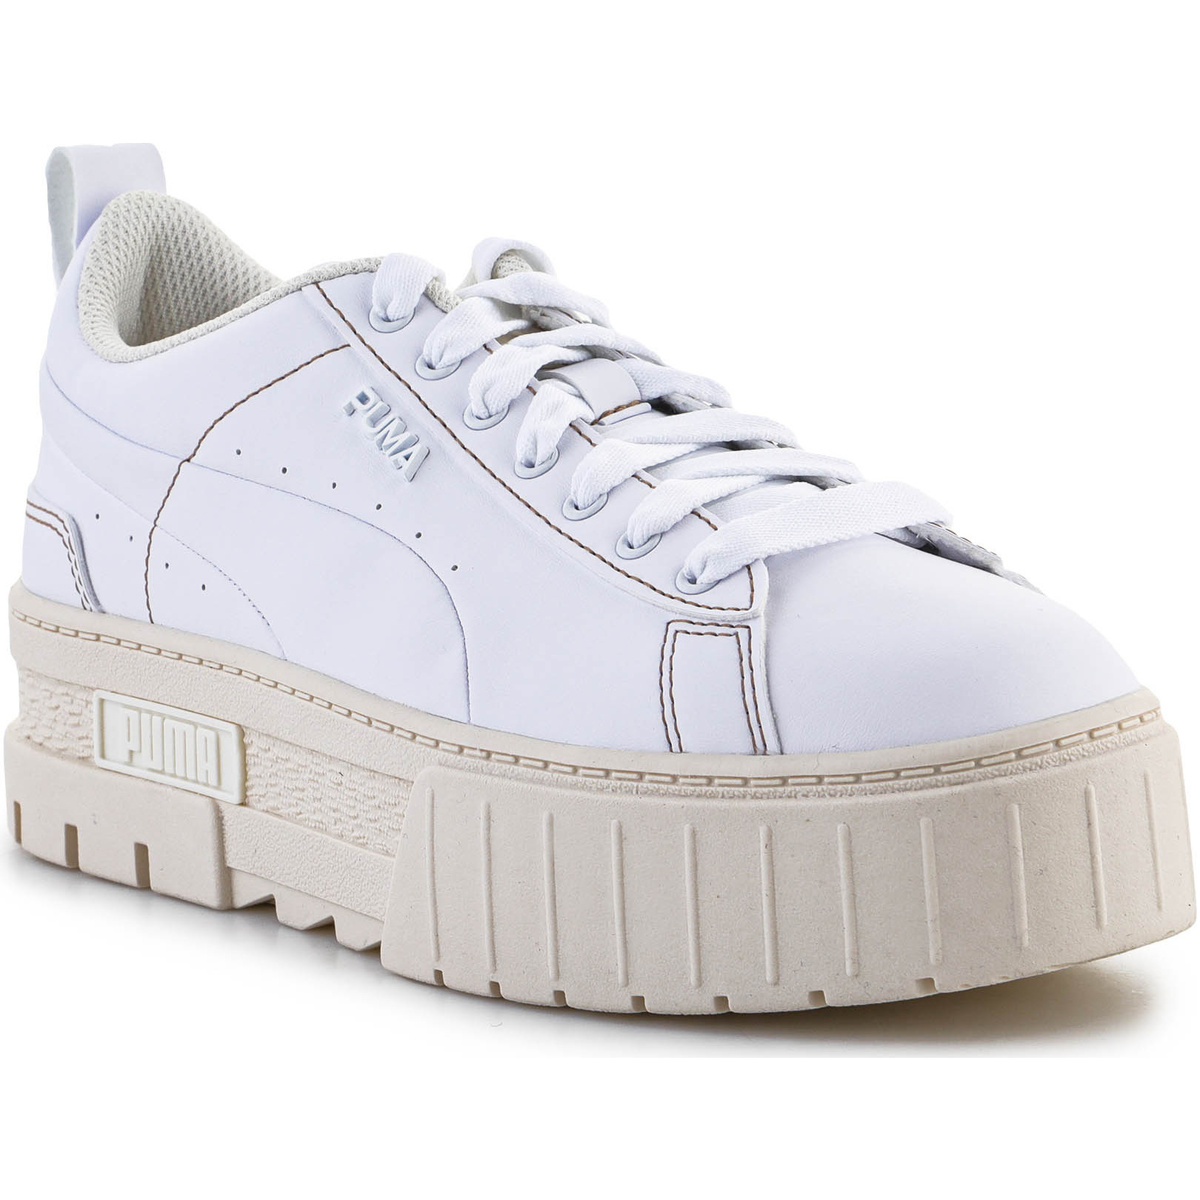 Puma  Xαμηλά Sneakers Puma Mayze Infuse Wns 384974 01 White